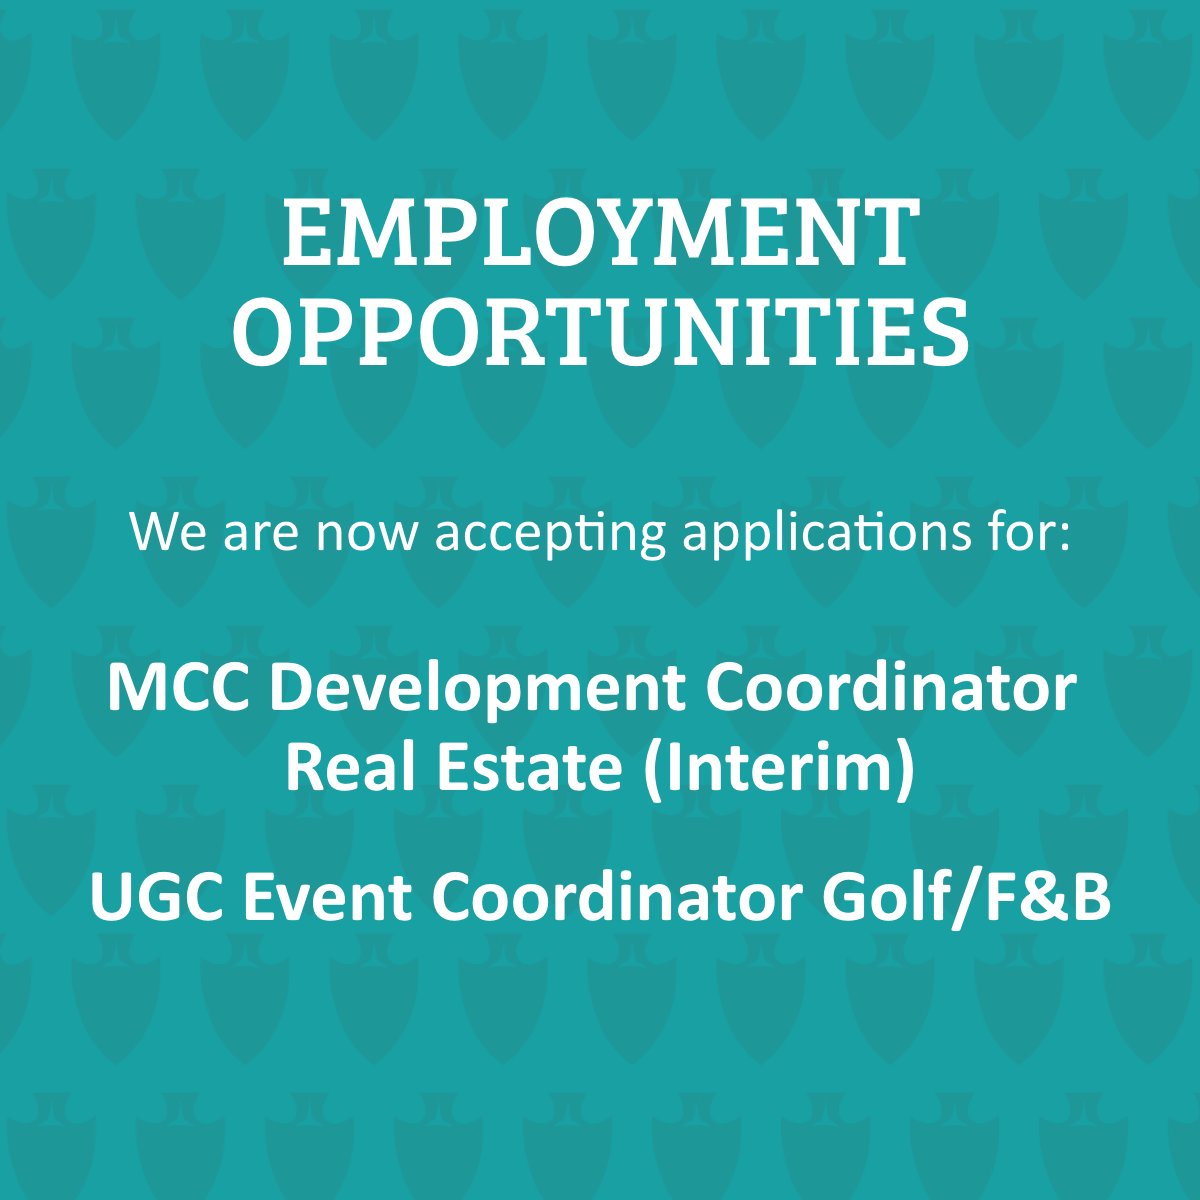 We are now accepting applications for MCC Development Coordinator Real Estate (Interim) and UGC Event Coordinator Golf & F&B. Link in bio for more job descriptions and to apply.